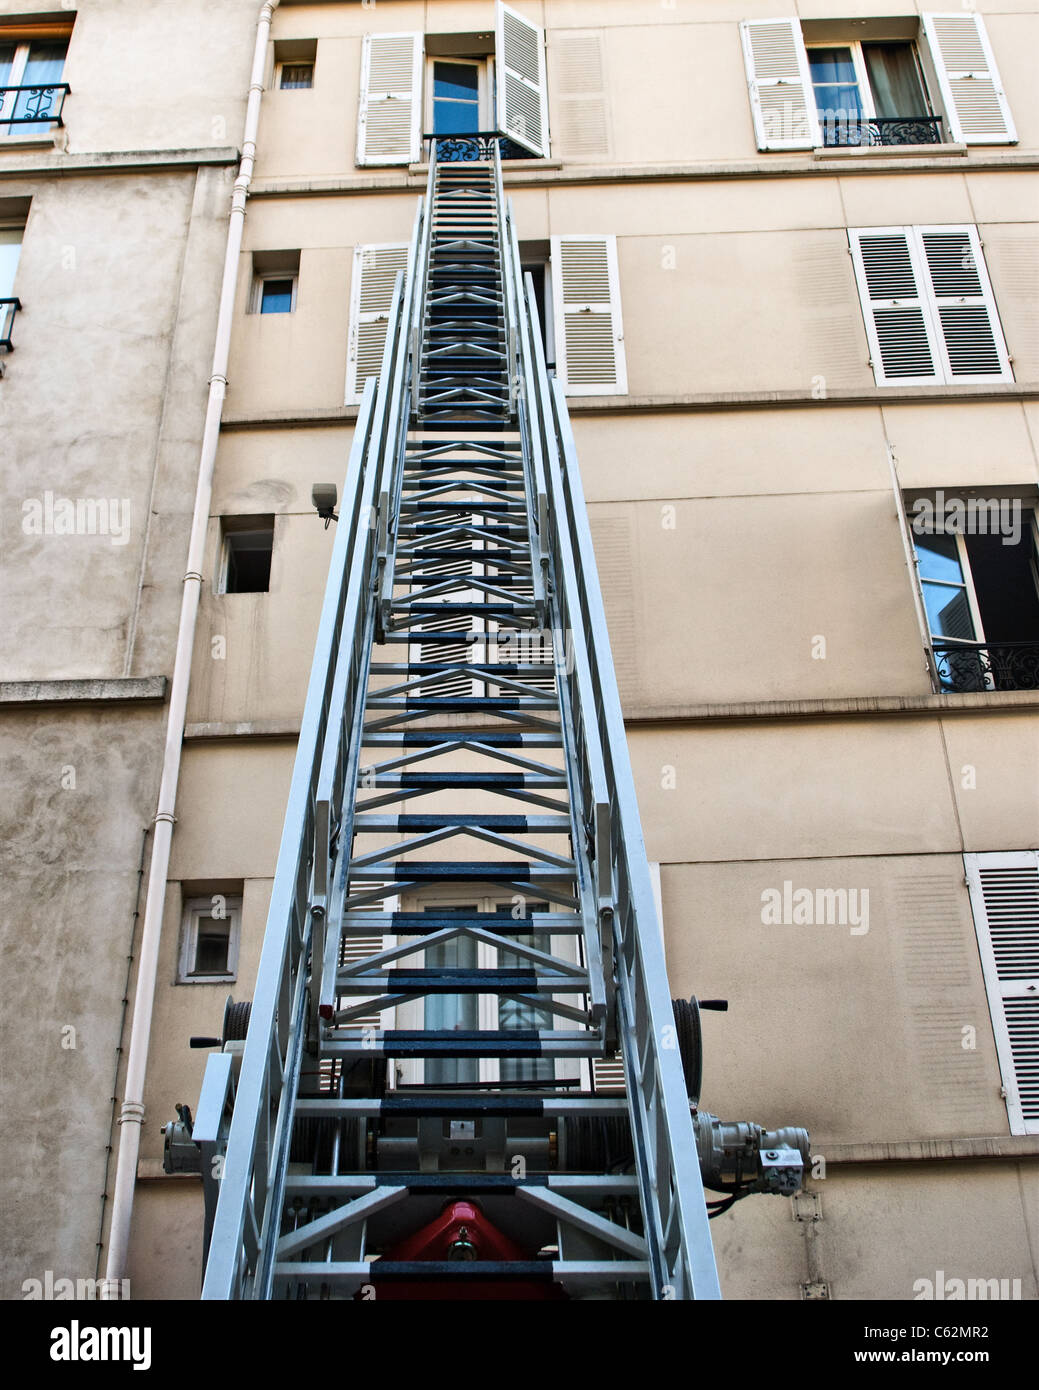 Extended fireman's (fire engine) ladder lift, up to an open window in a tower block Stock Photo